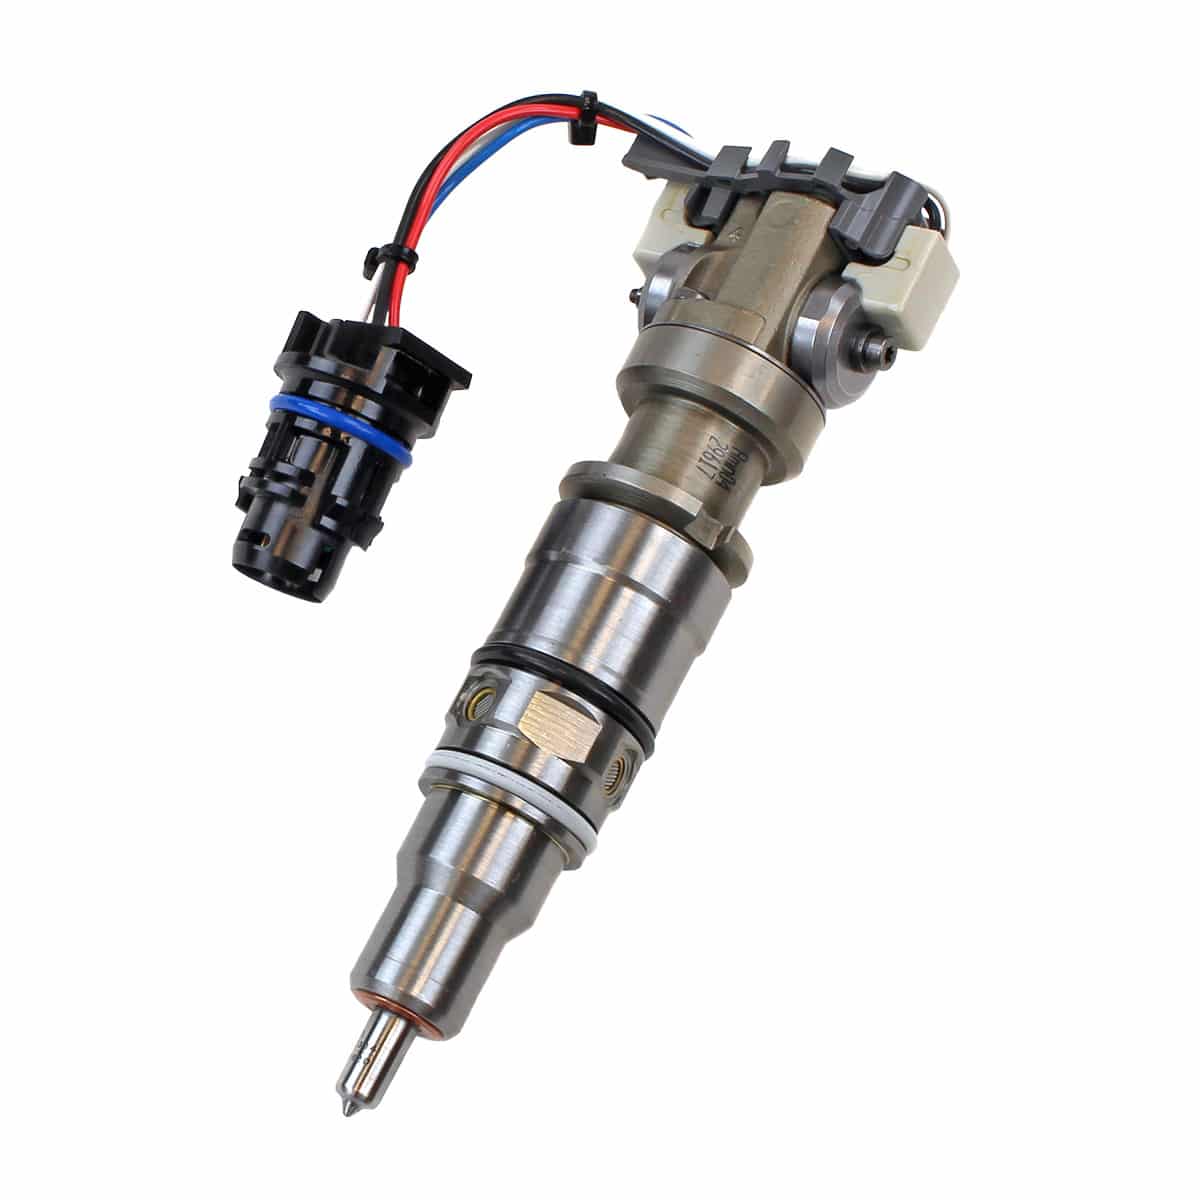 2003-2007 Powerstroke Fuel Injector (Stock) (CN-5019-RM)-Stock Injectors-Industrial Injection-CN-5019-RM-Dirty Diesel Customs